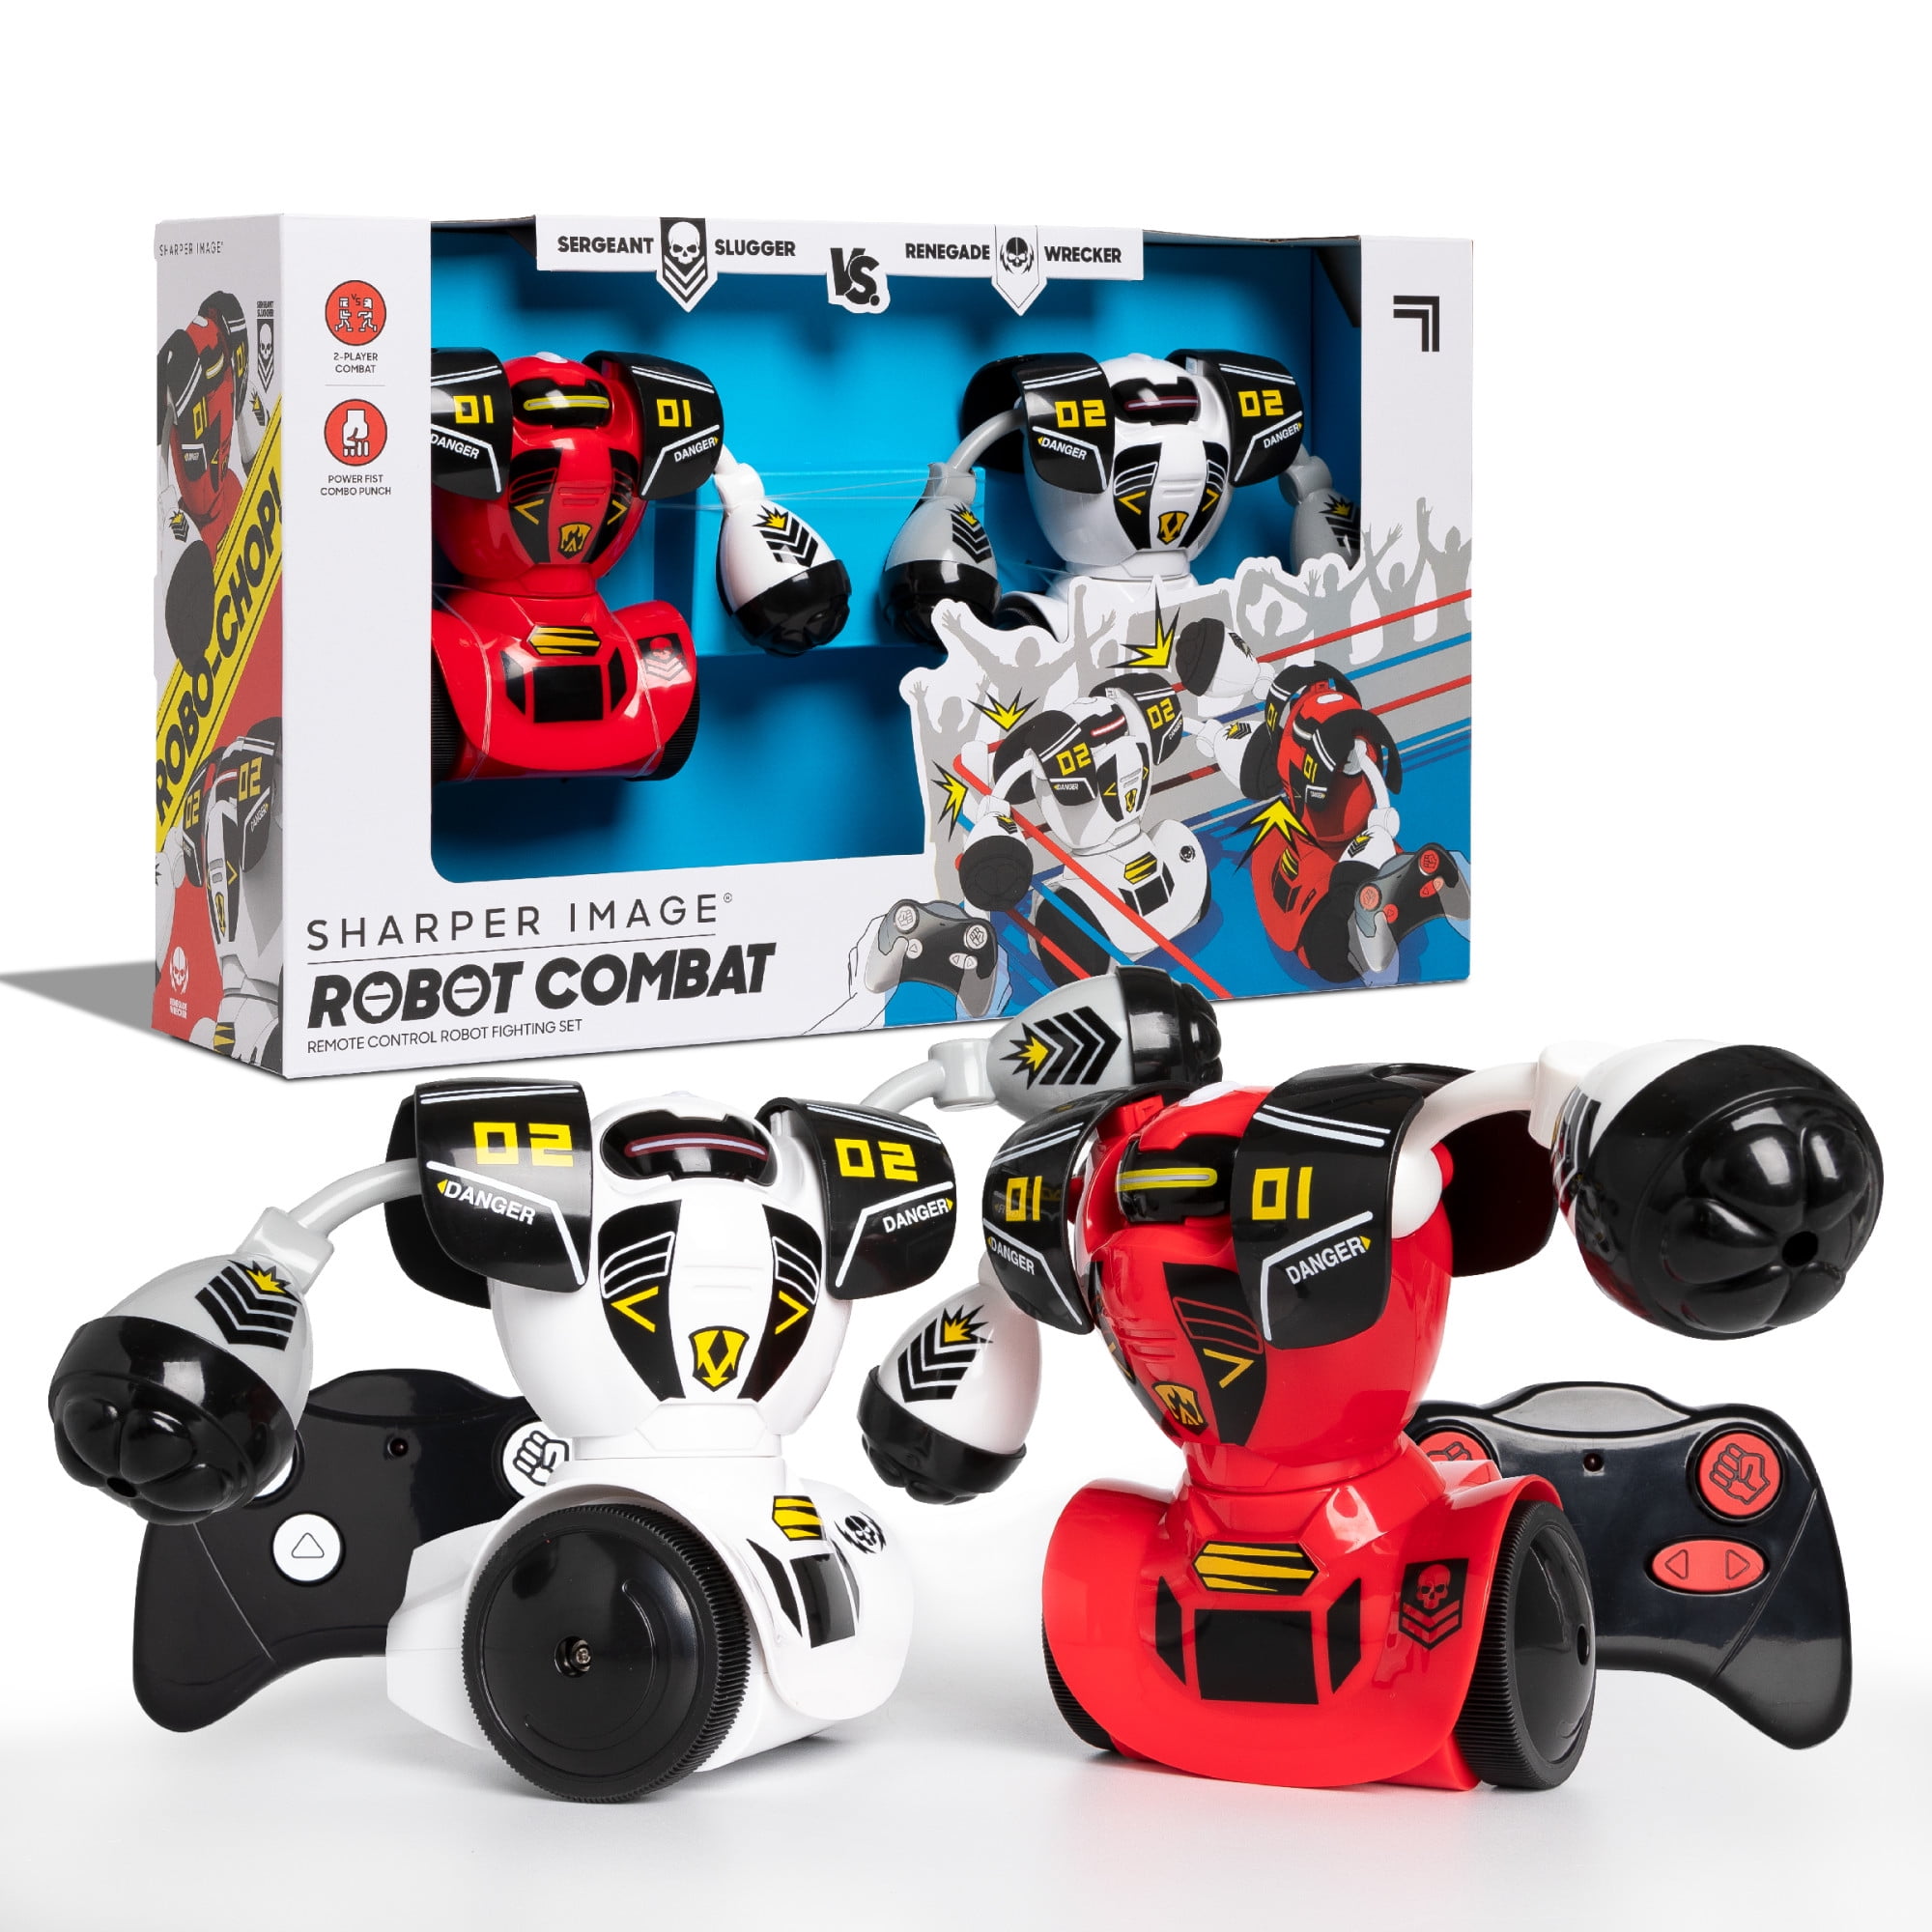 Sharper Image Remote Control Robot Combat Set, Multiplayer RC Toy for Kids, Robo Duel Game with Infrared Controllers, Challenge a Friend, Great Gift for Boys or Girls, Red & White